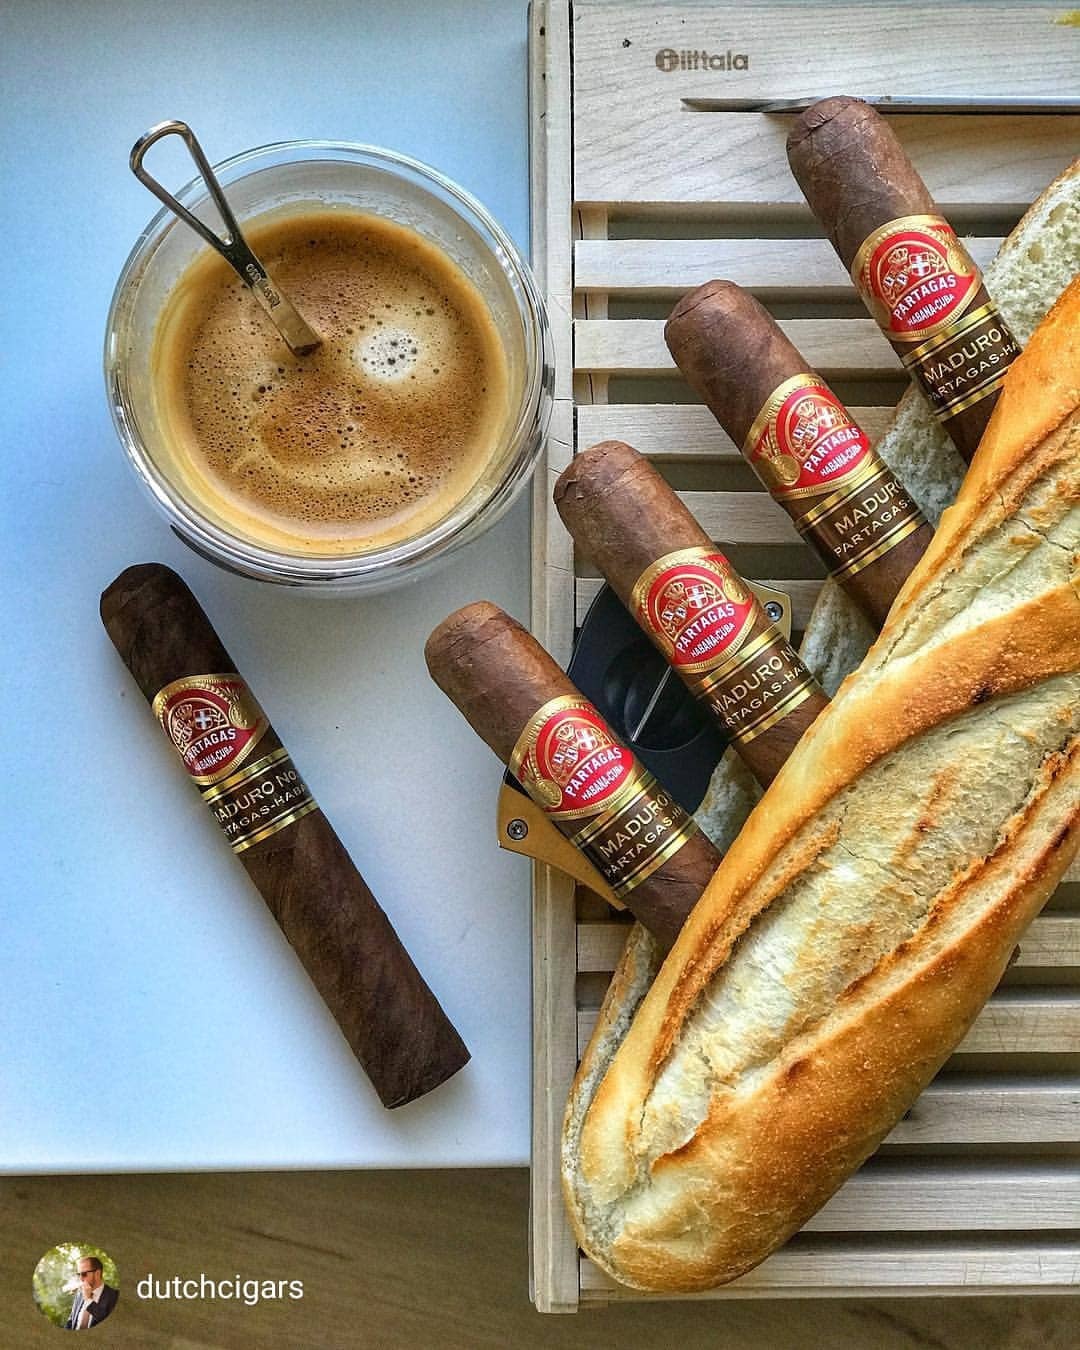 Breakfast for champs!!
🔥💨☕
📸 : @dutchcigars
Like 👍, Repost 🔃, Tag 🔖 Follow 👣 Us & Subscribe ✍ on👇:
Www.Facebook.Com/CigarsAndWhiskeys
Www.Flipboard.Com/@CigarsWhiskeys
Www.CigarsAndWhiskeys.Tumblr.Com
#Cigar #Cigars #Botl #Sotl #BrothersOfTheLeaf...